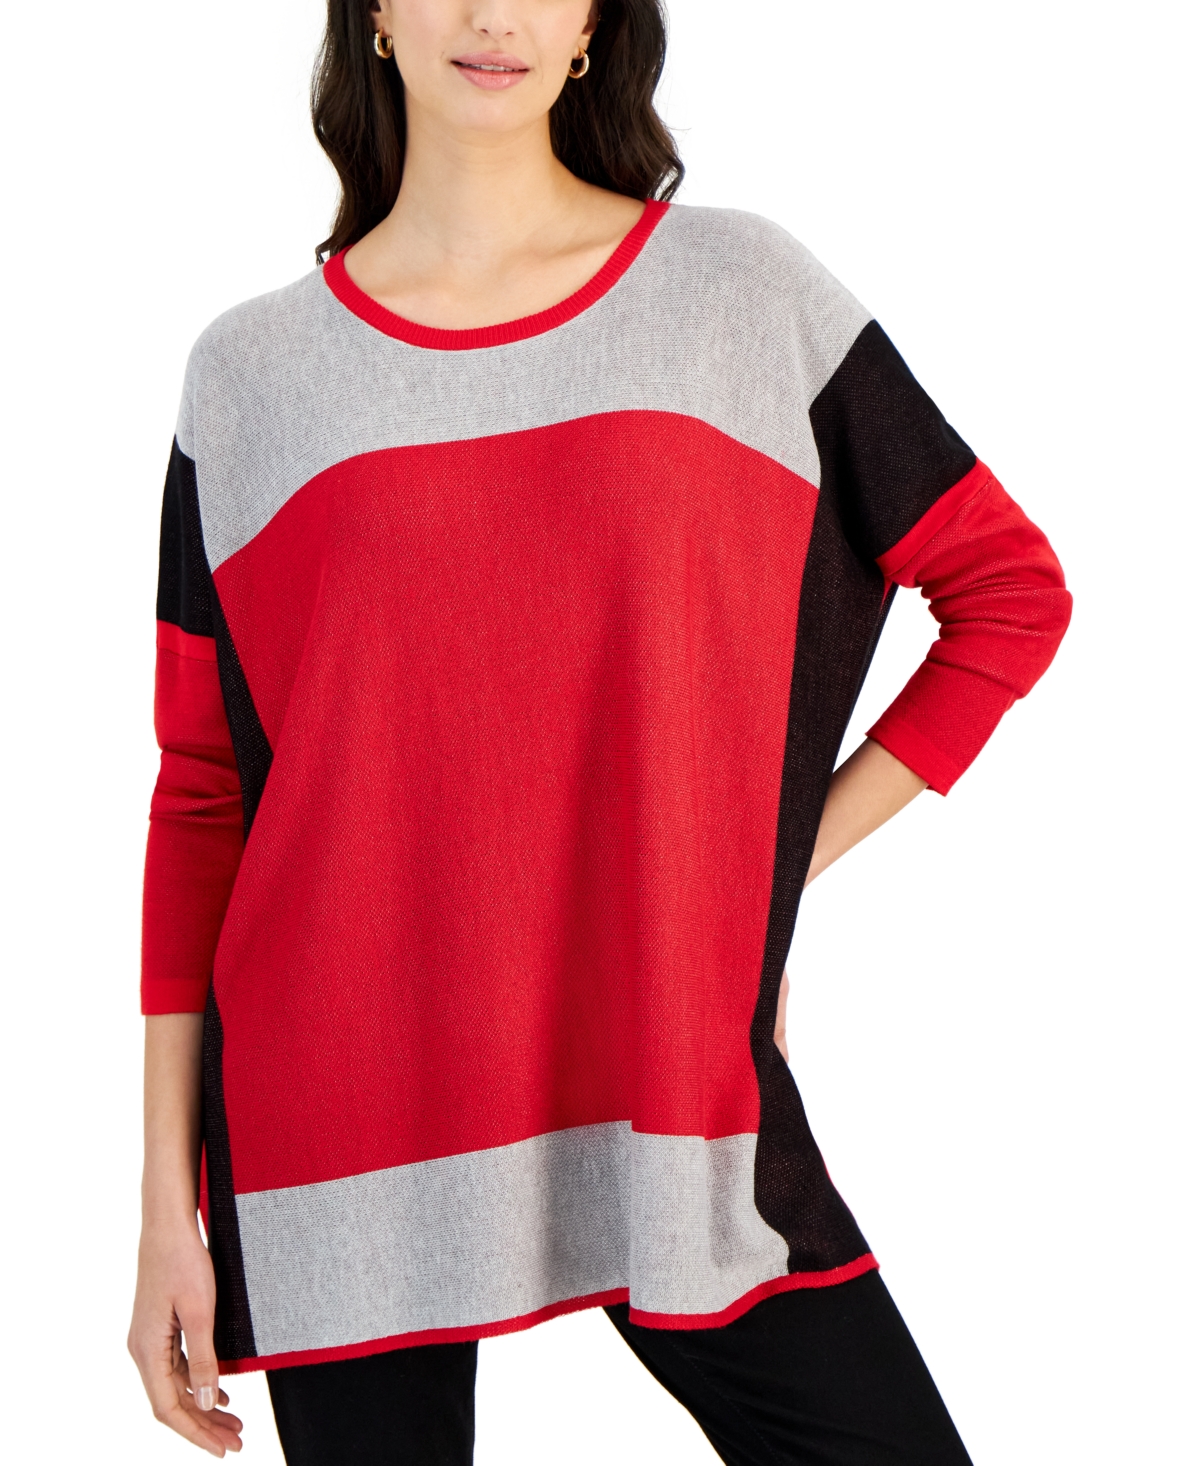 Fever Women's Crewneck Colorblocked Poncho Sweater In Cherry  Black